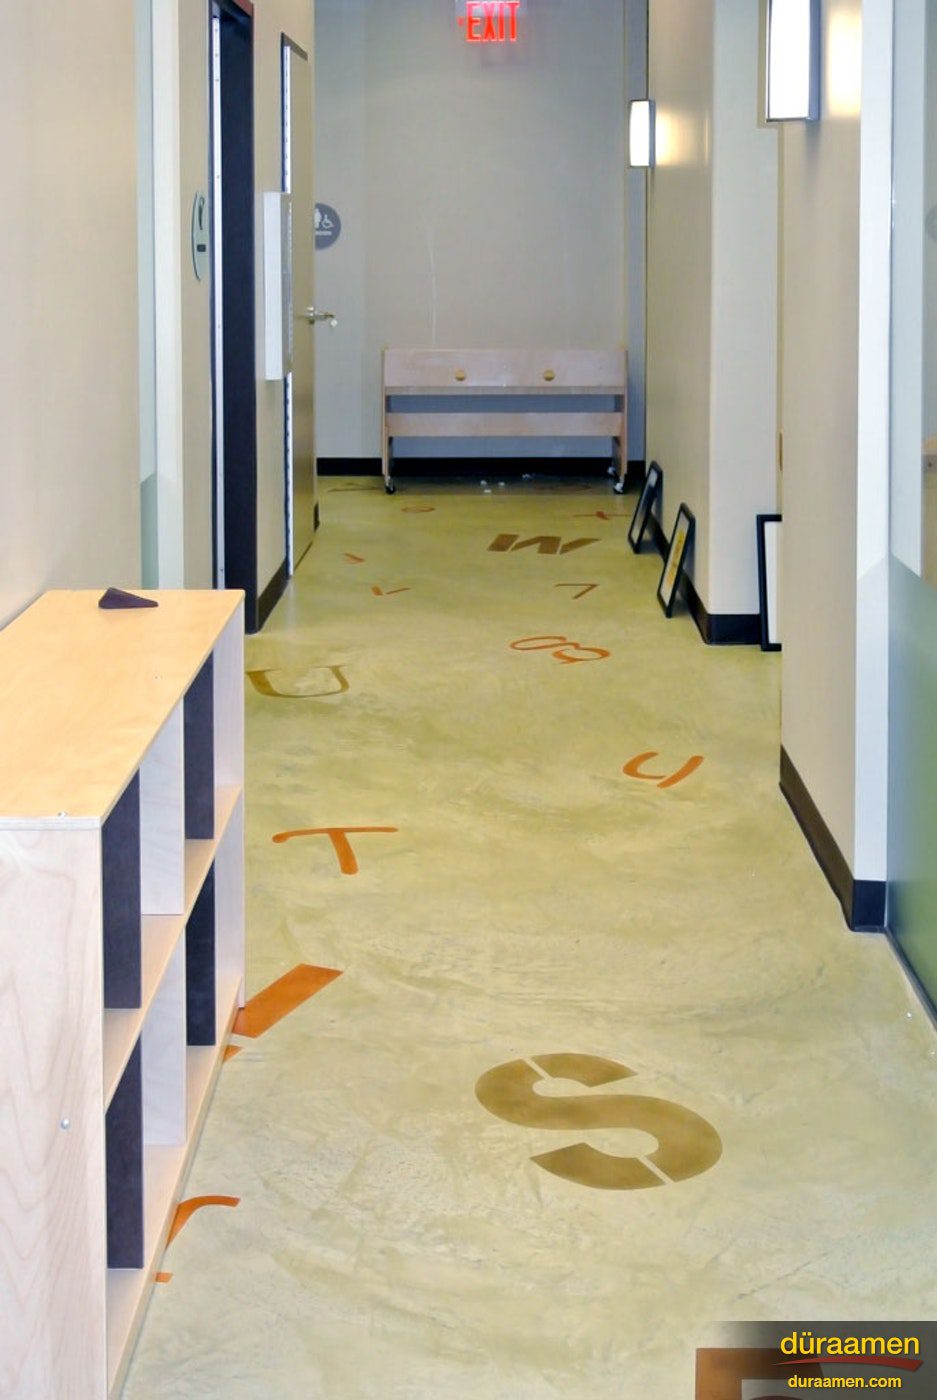 A resurfaced concrete floor yields many design possibilities This daycare center had letters and numbers stenciled on the floor using playful colors Matte Polished Concrete floor at CCLC Day Care Center in NYC | Duraamen Engineered Products Inc